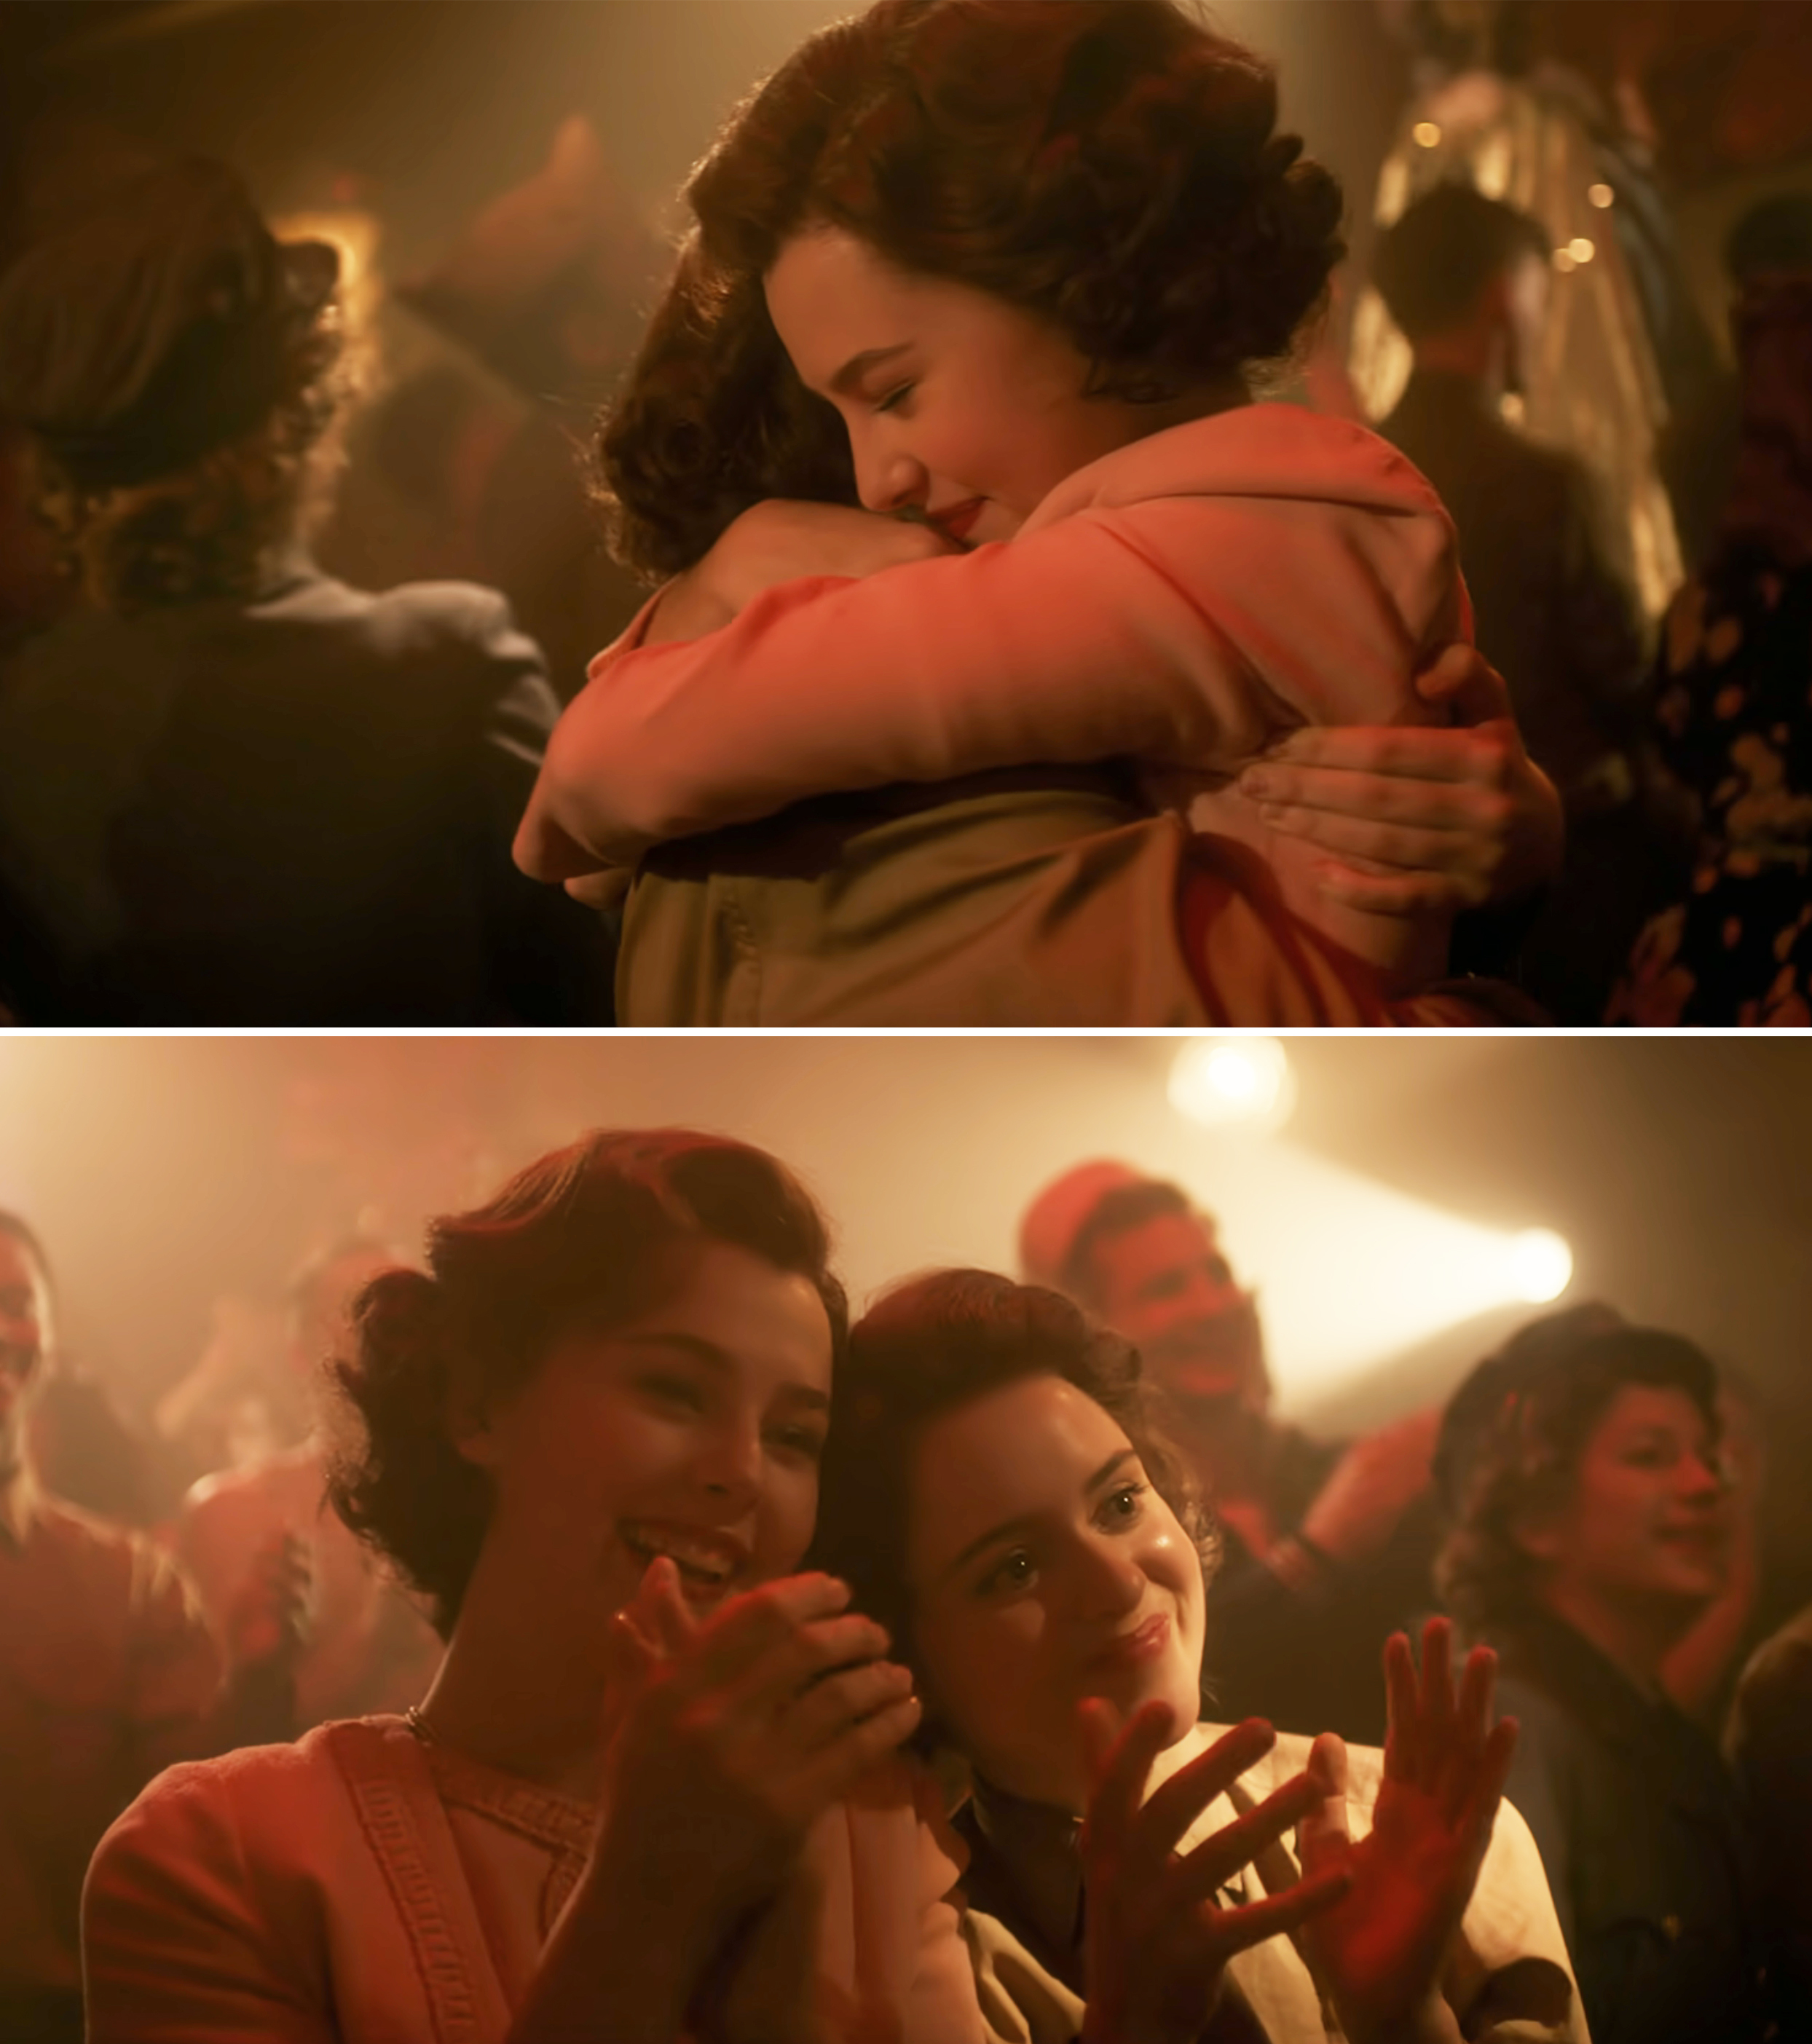 A young Margaret and Elizabeth hugging and then applauding in a crowd